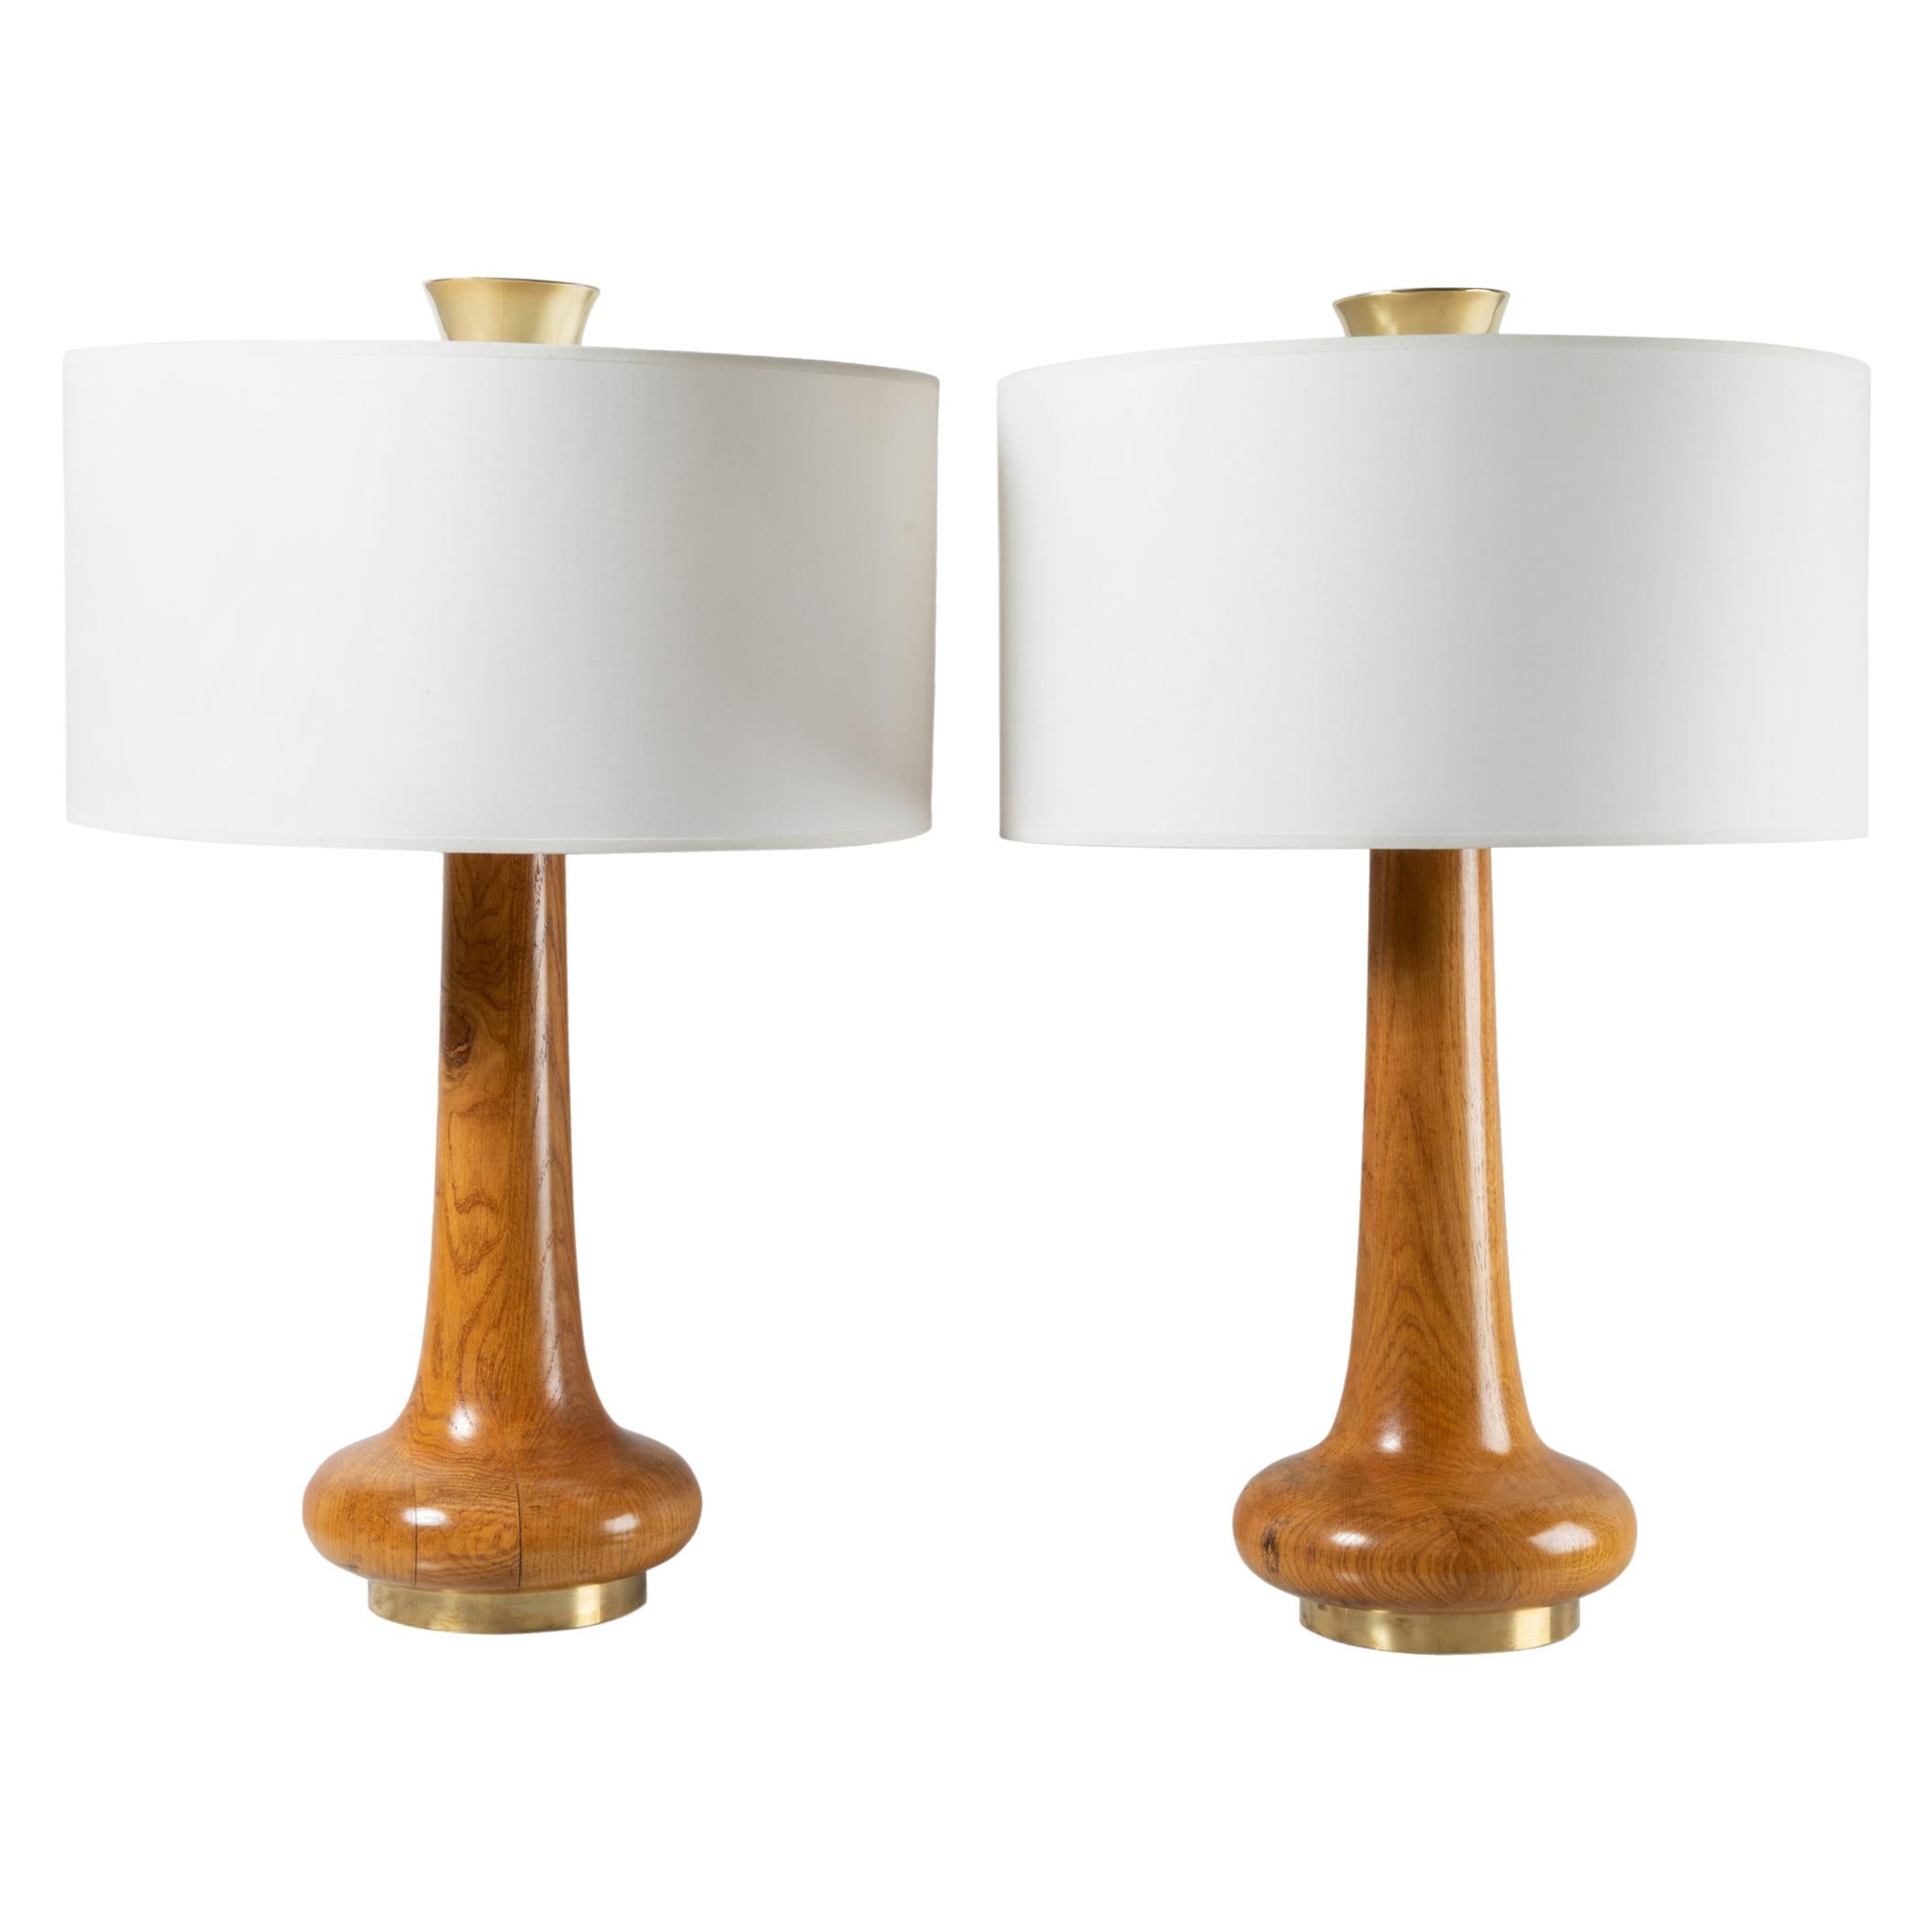 Pair of Oak and Brass Table Lamps, France, 1970's